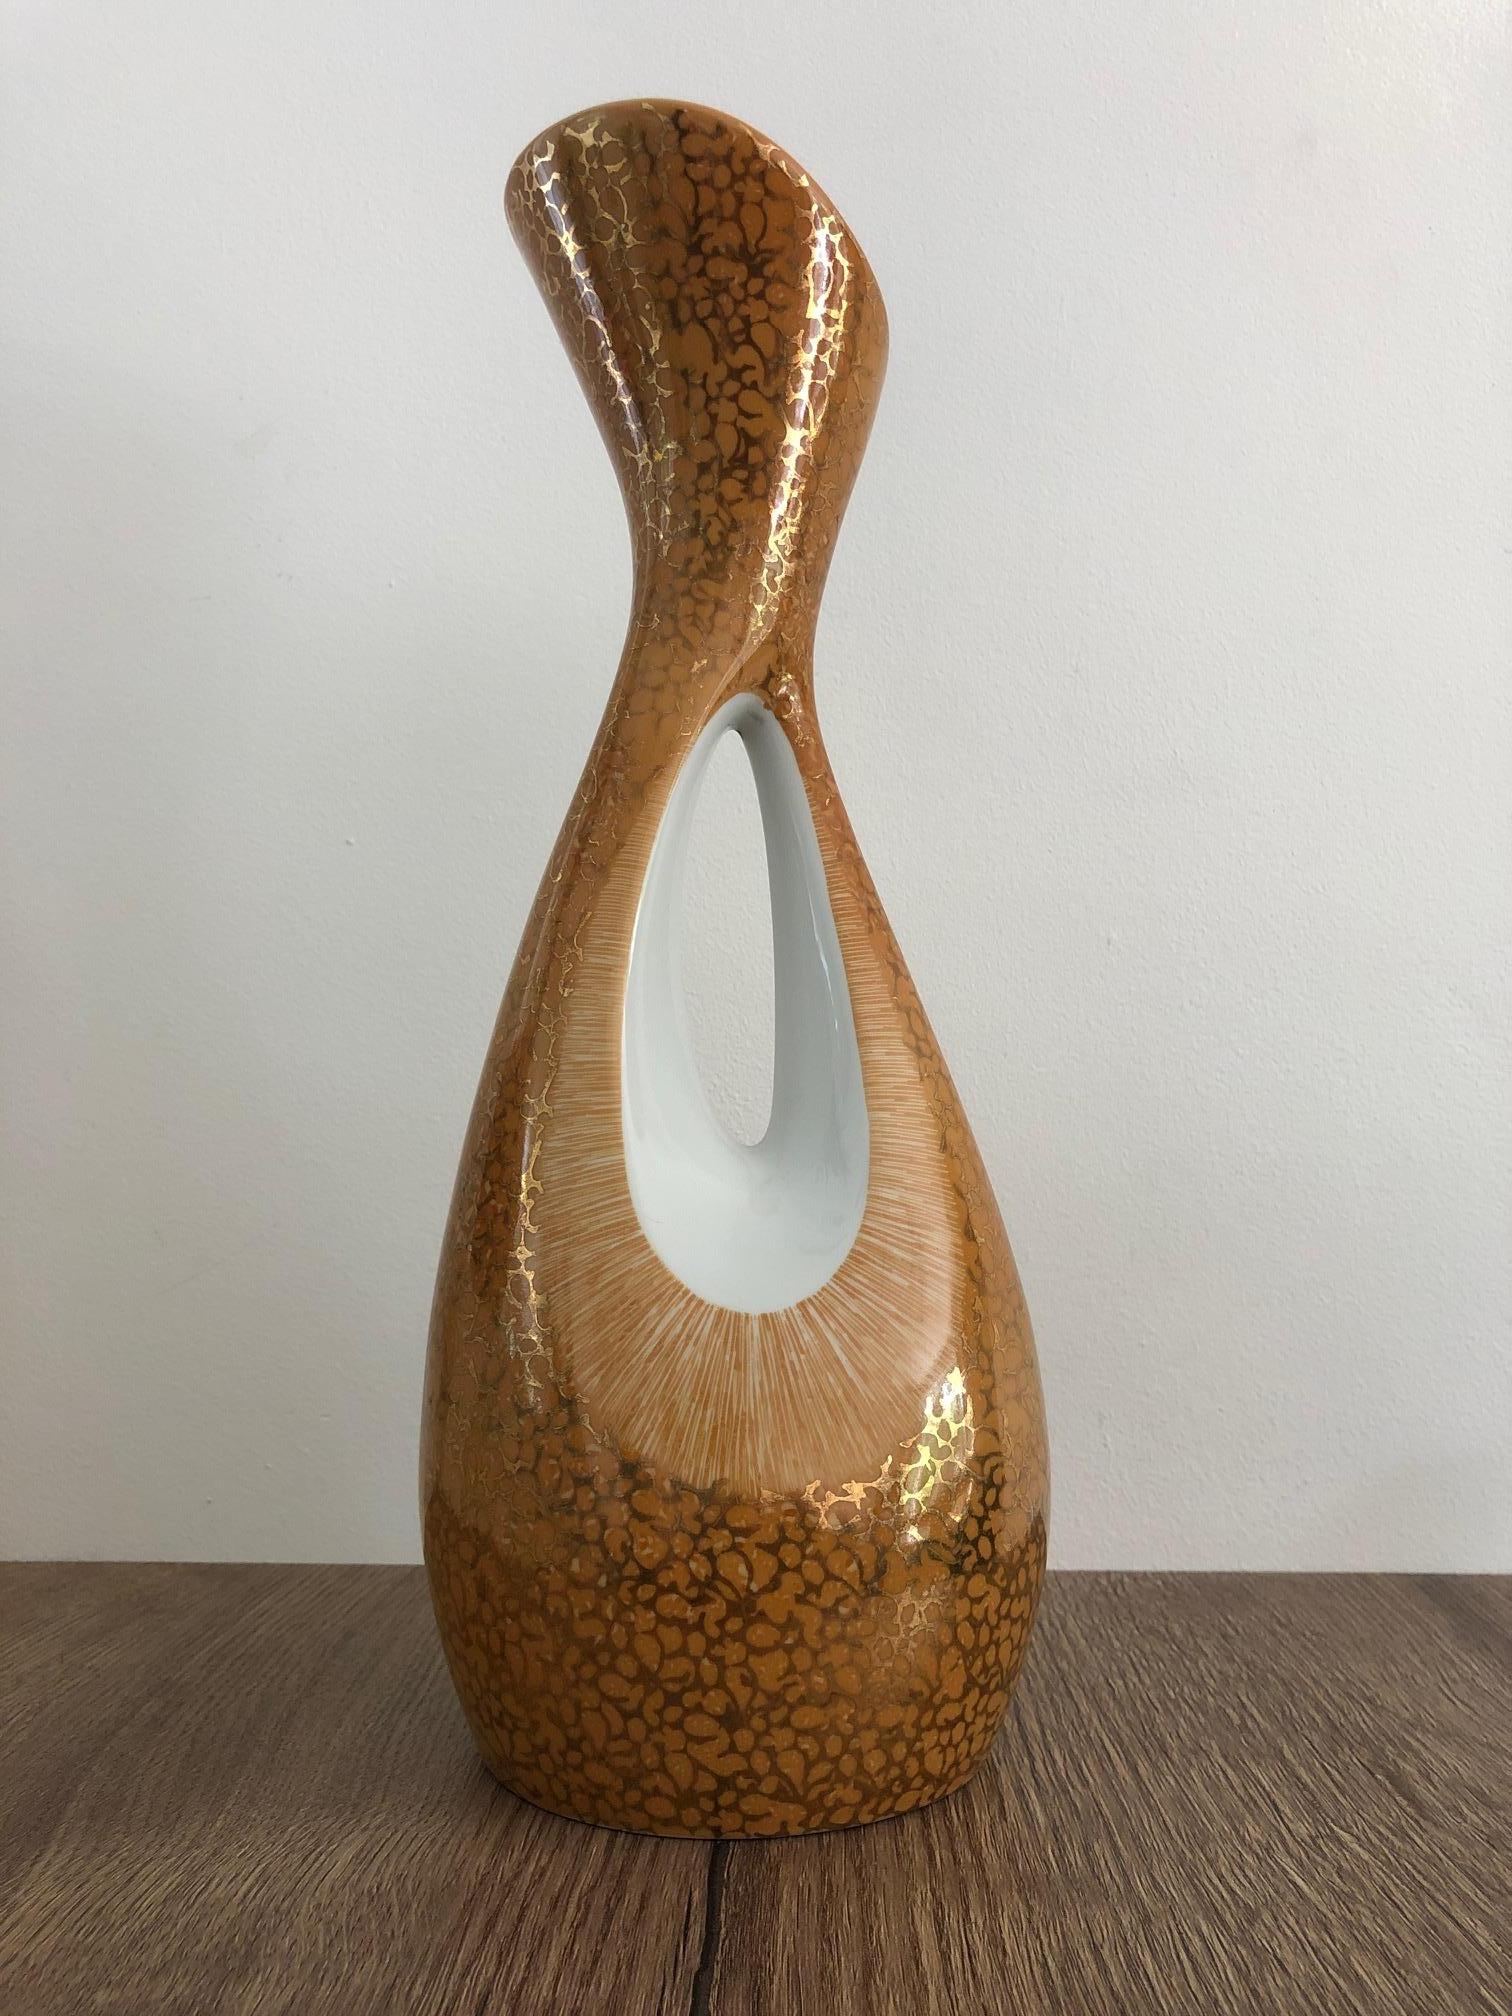 Vase model ''Calypso'' designed by Zbigniewa Sliwowska-Wawrzyniak in 1957, produced by Porcelain Factory ''Cmielów'' in Poland in the 1960s. Very rare orange-goldish glazing. Perfect condition. Signature on the bottom.